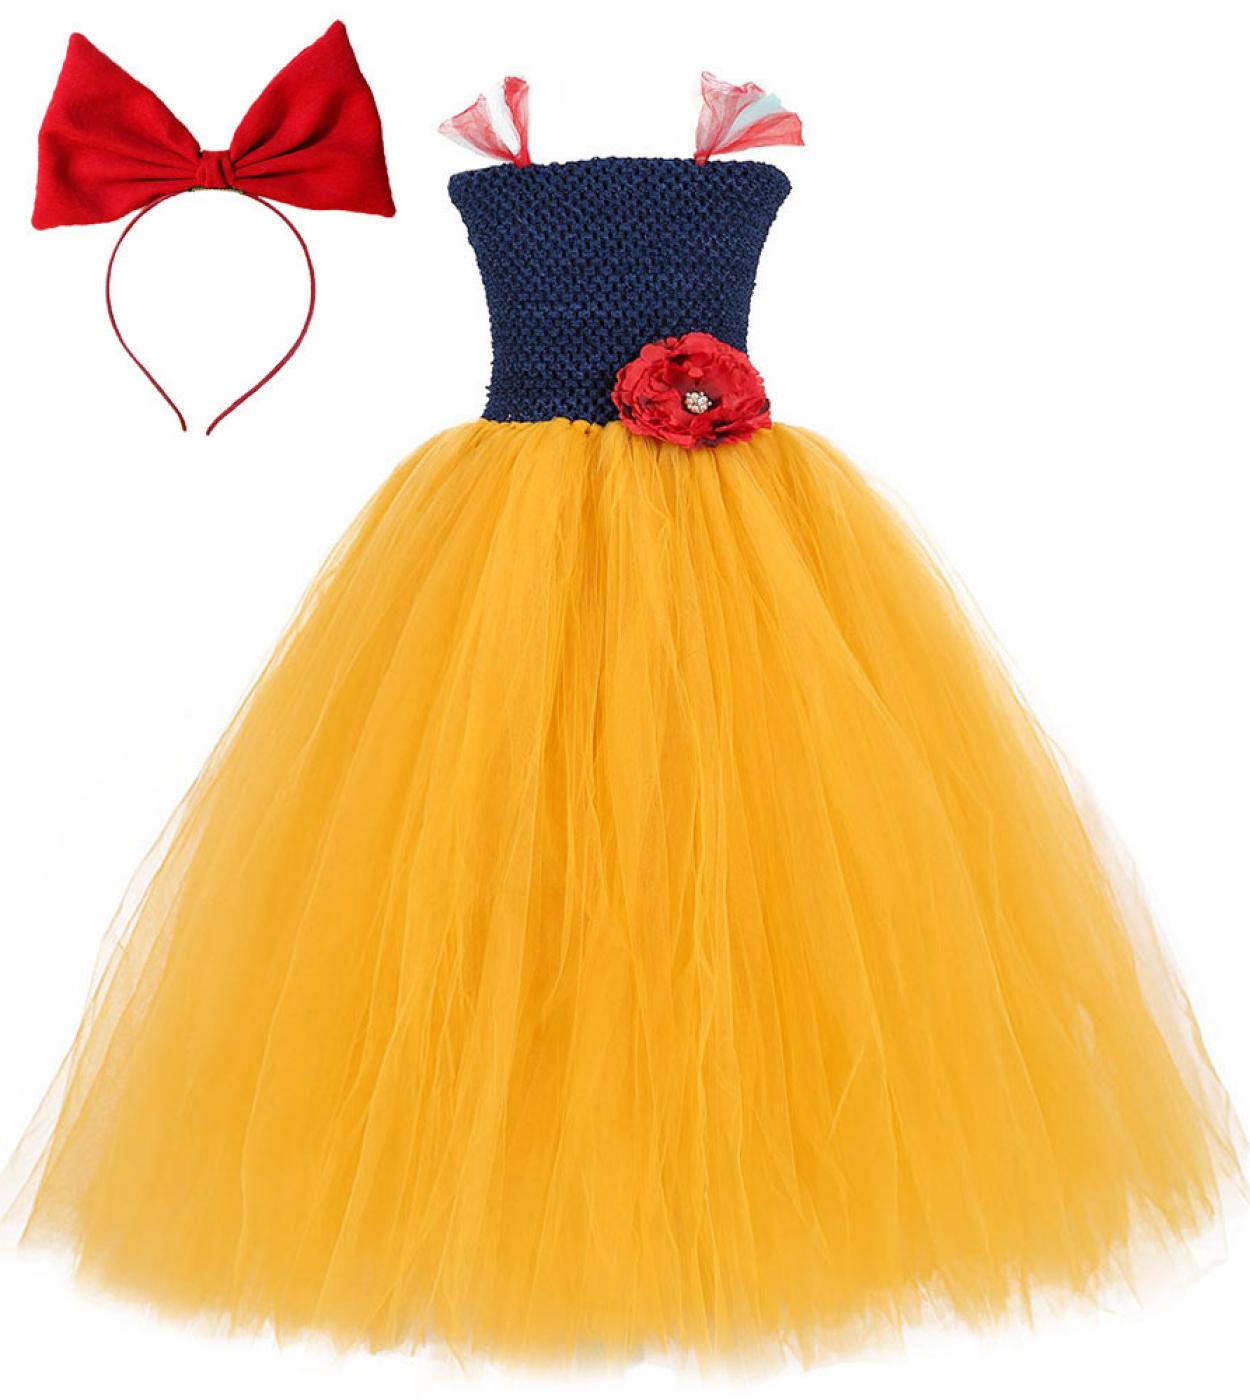 Snow White Princess Long Dress Girls Princess Snowwhite Cosplay Costumes For Kids Halloween New Year Dresses With Bow He